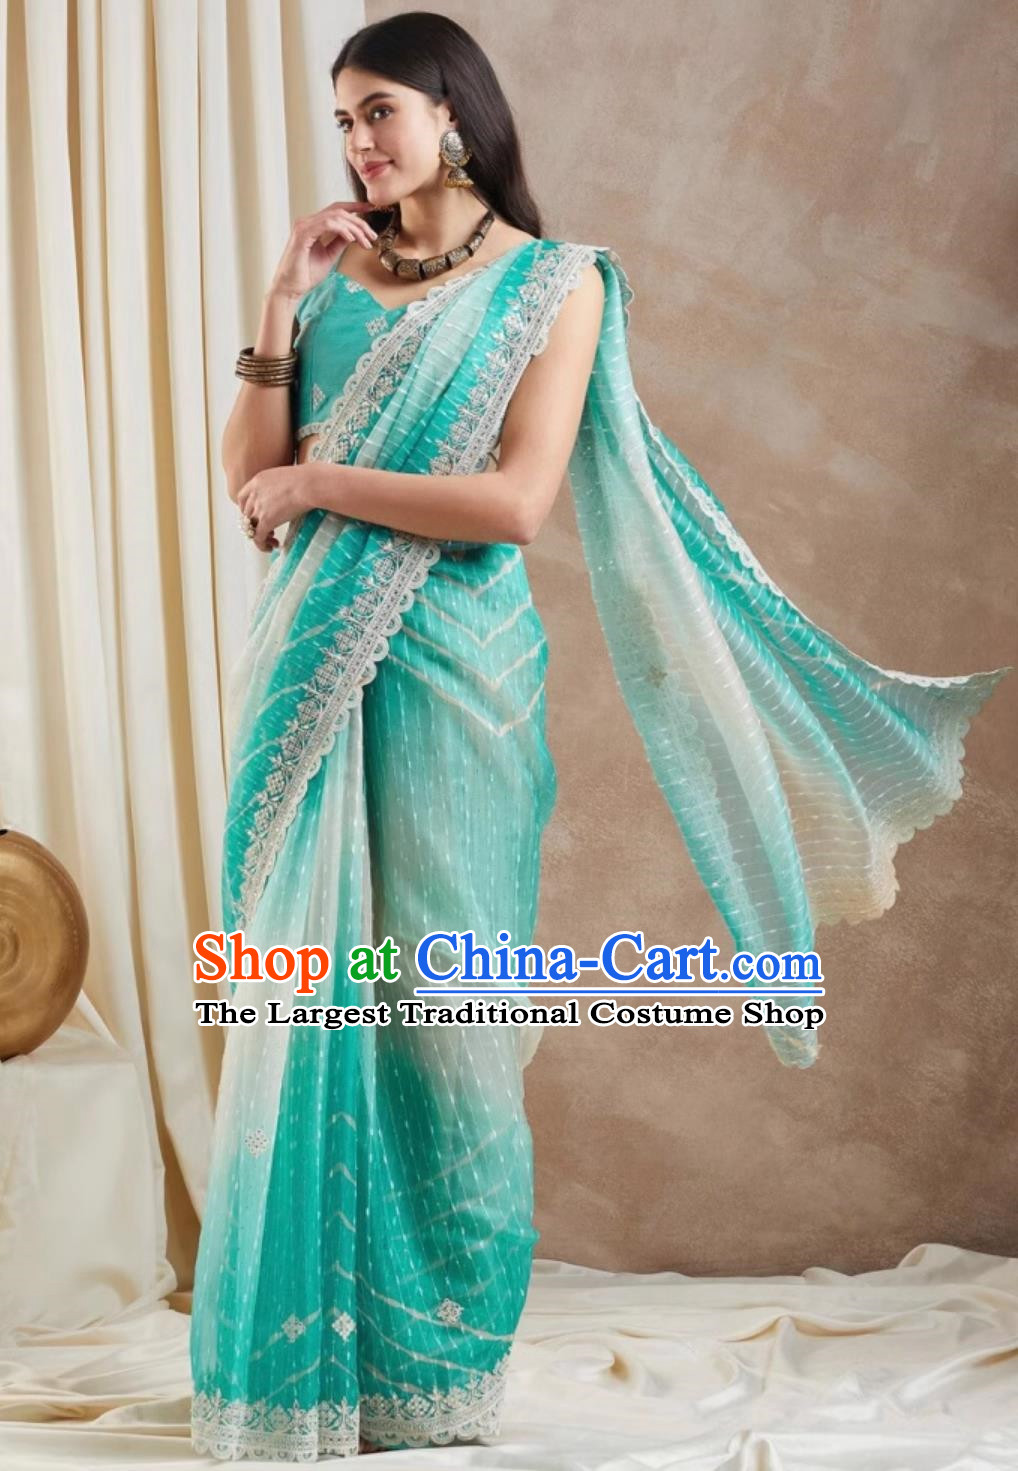 Traditional Festival Sky Blue Sari Dress India Woman Embroidery Costume Indian National Clothing